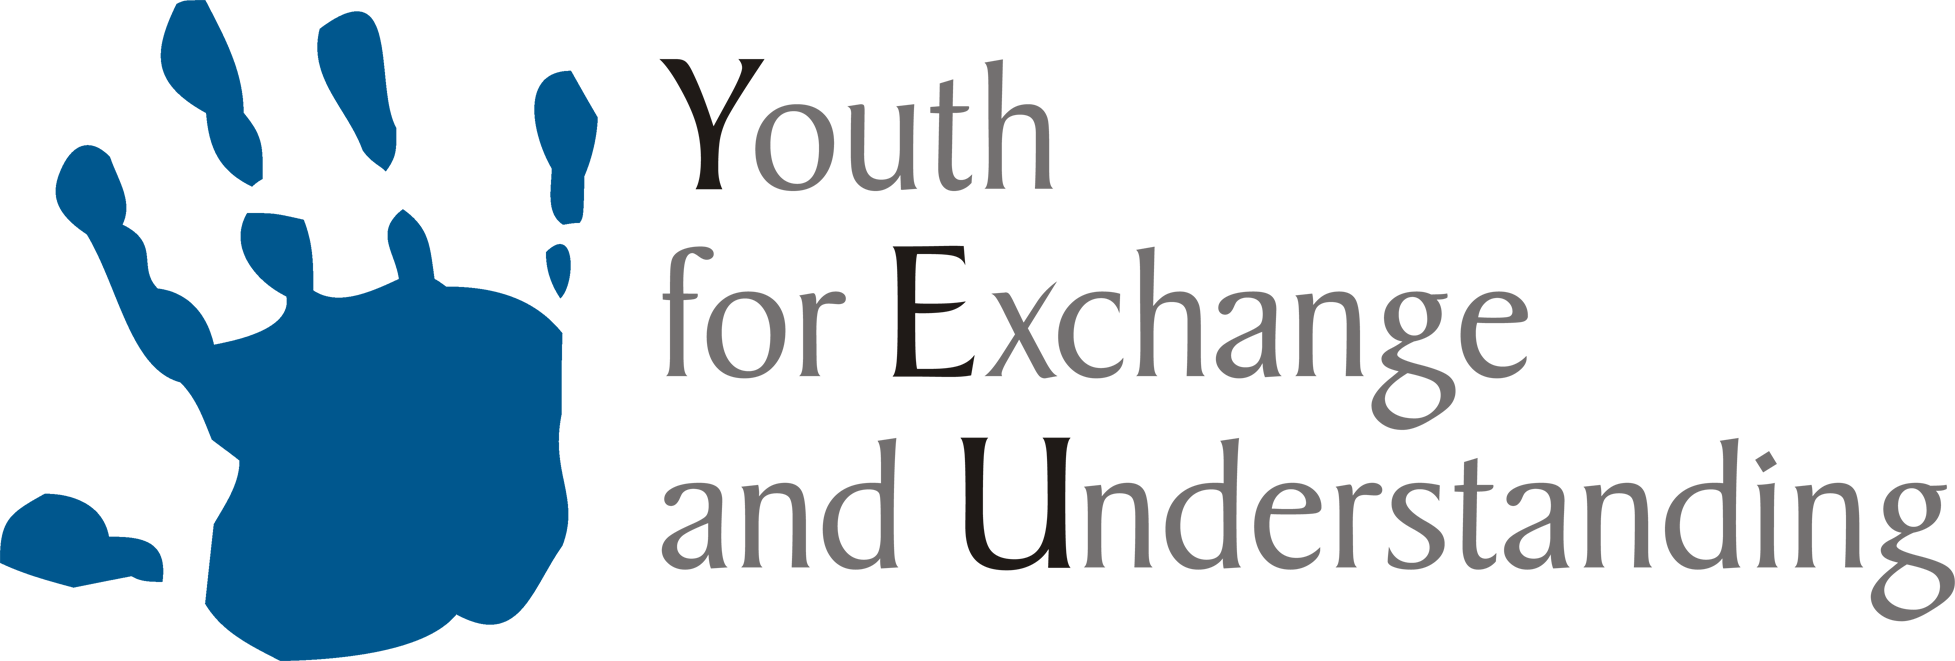 youth for exchange and understanding